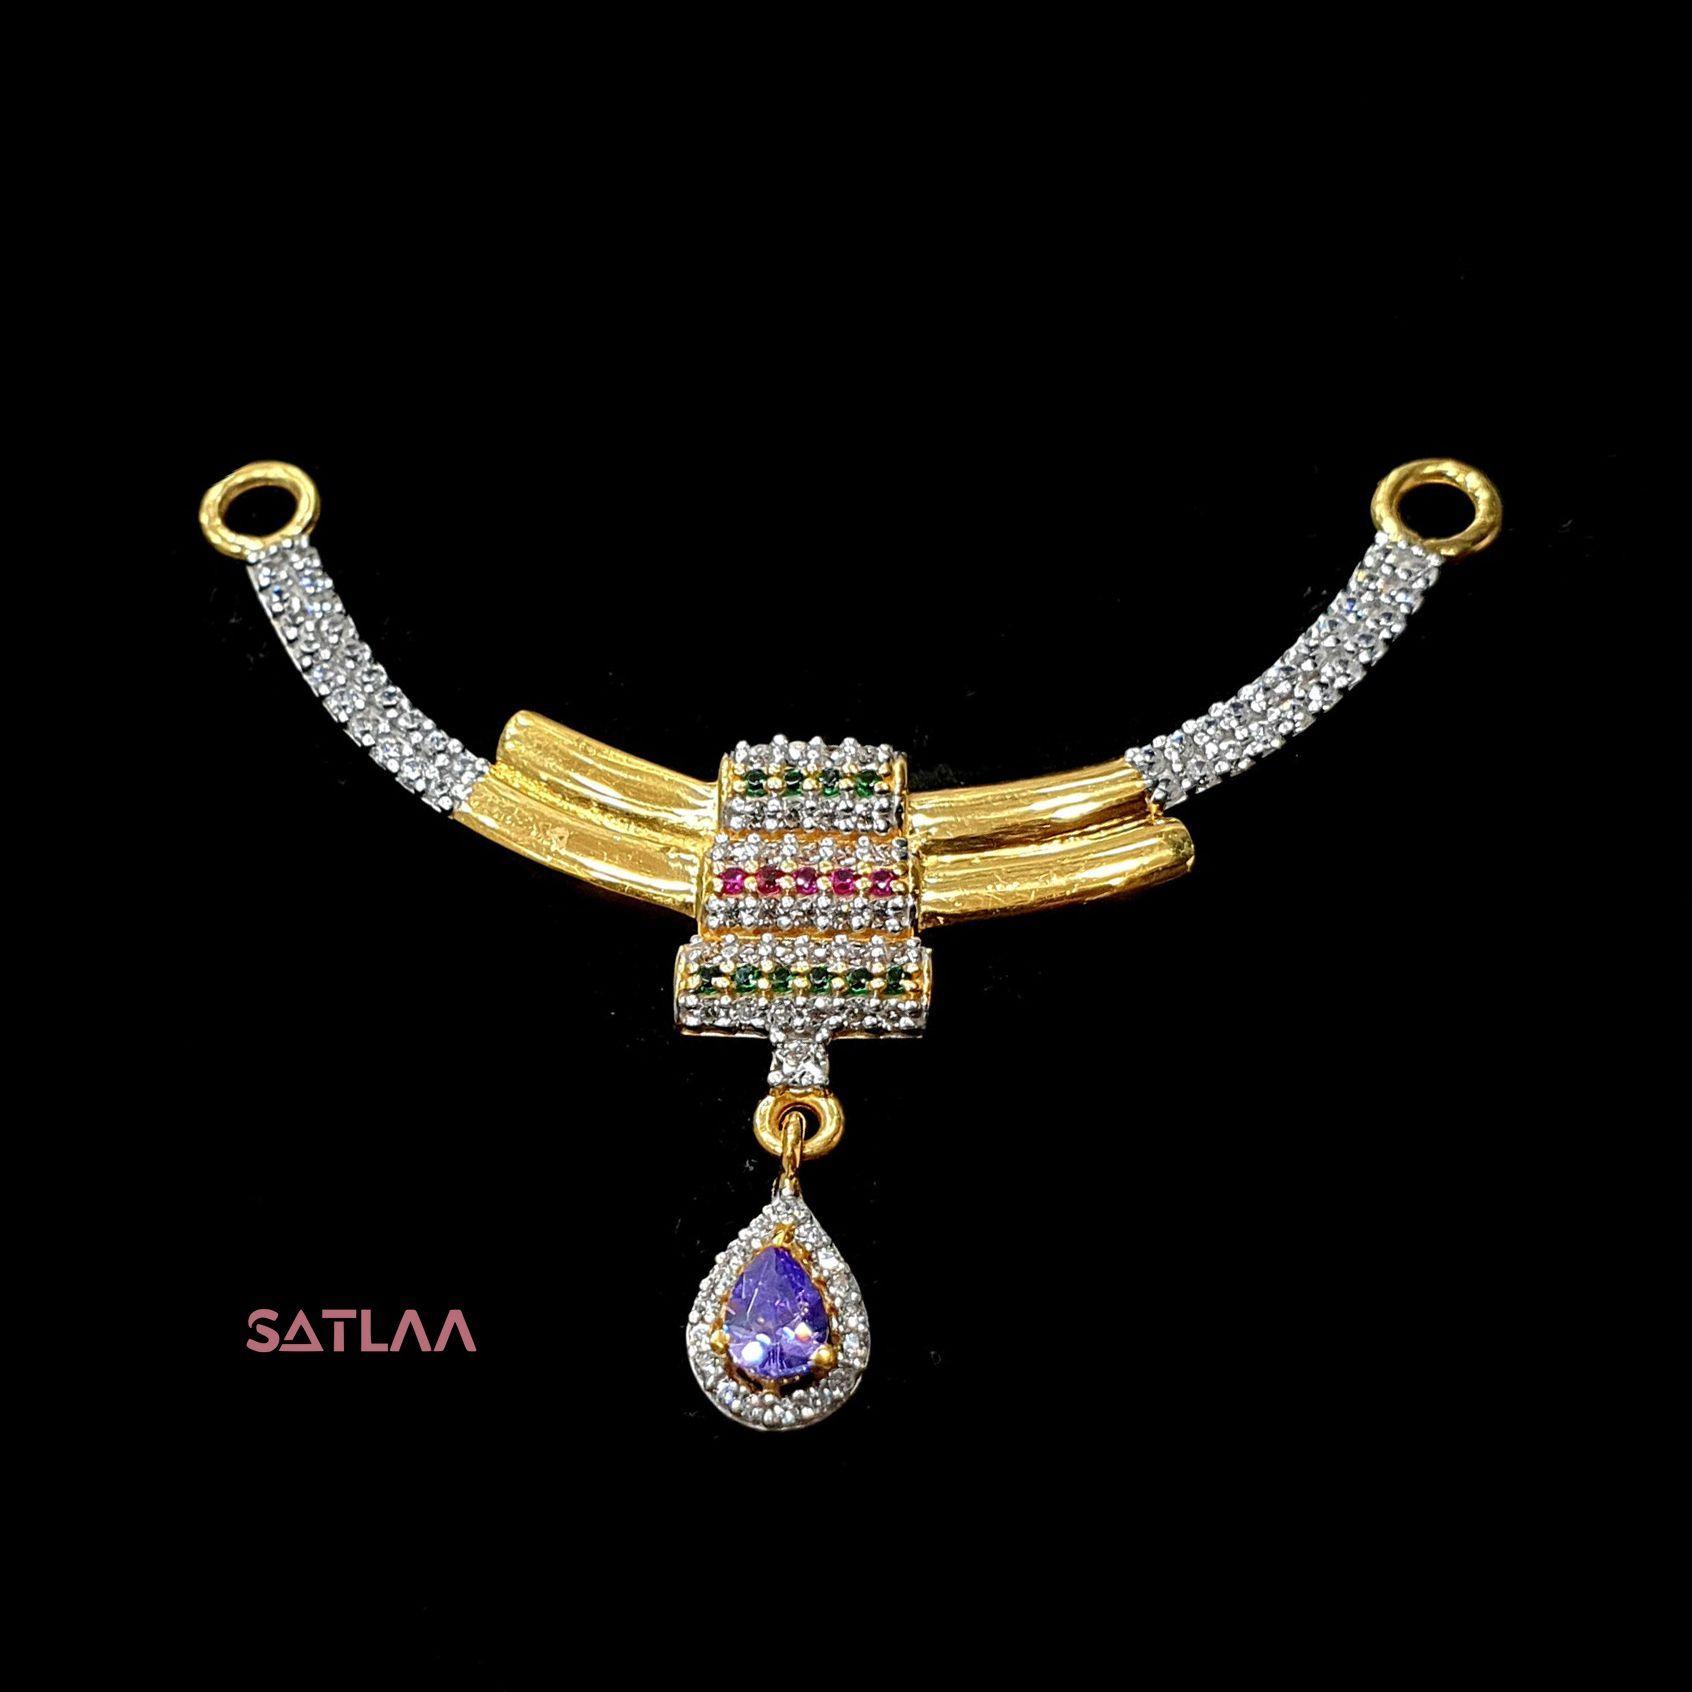 New and Latest Design of Satlaa Desi Indian Rajasthani Gold Mangalsutra 